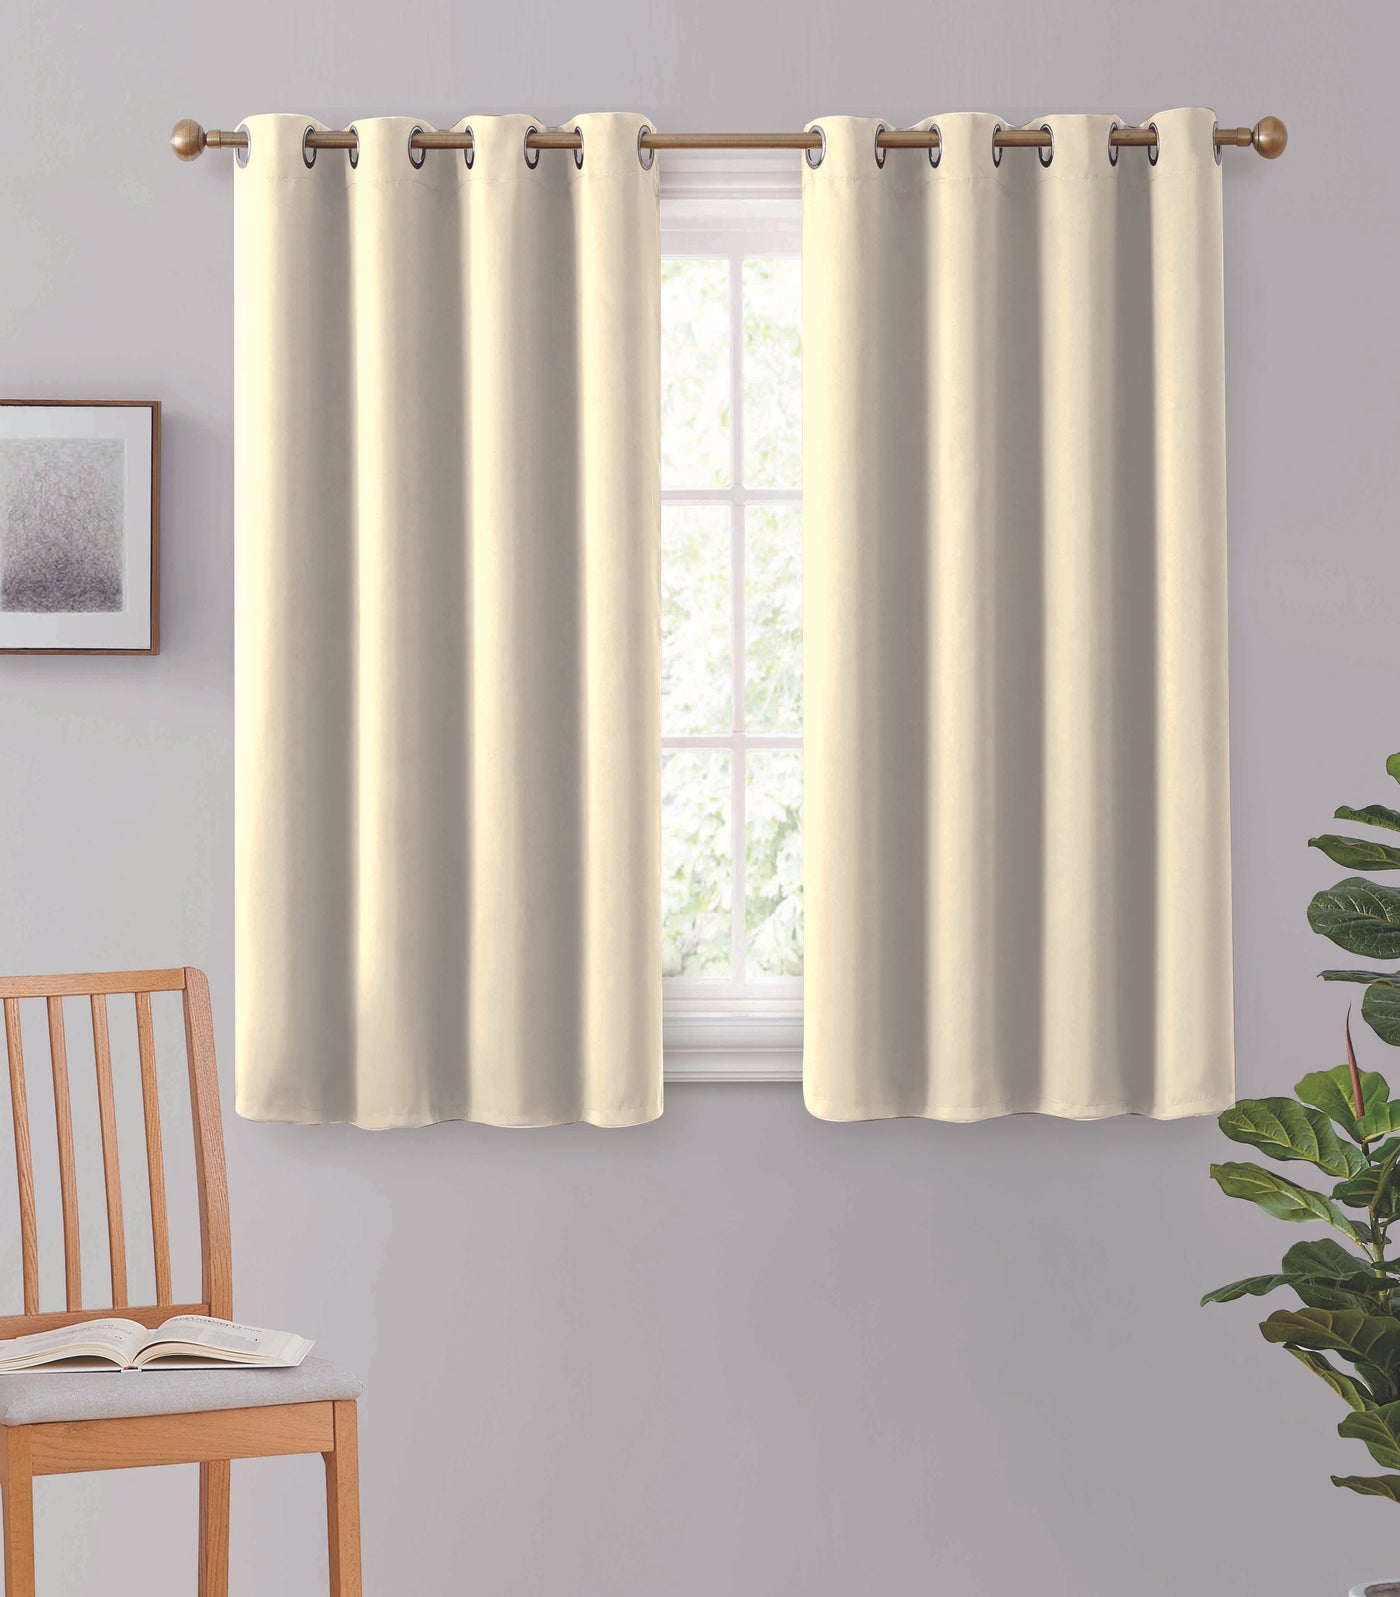 2pc Solid Grommet Thermal Insulated Window Curtain Panels Room Darkening Blackout 45" - Jenin-Home-Furnishing.CURTAINS